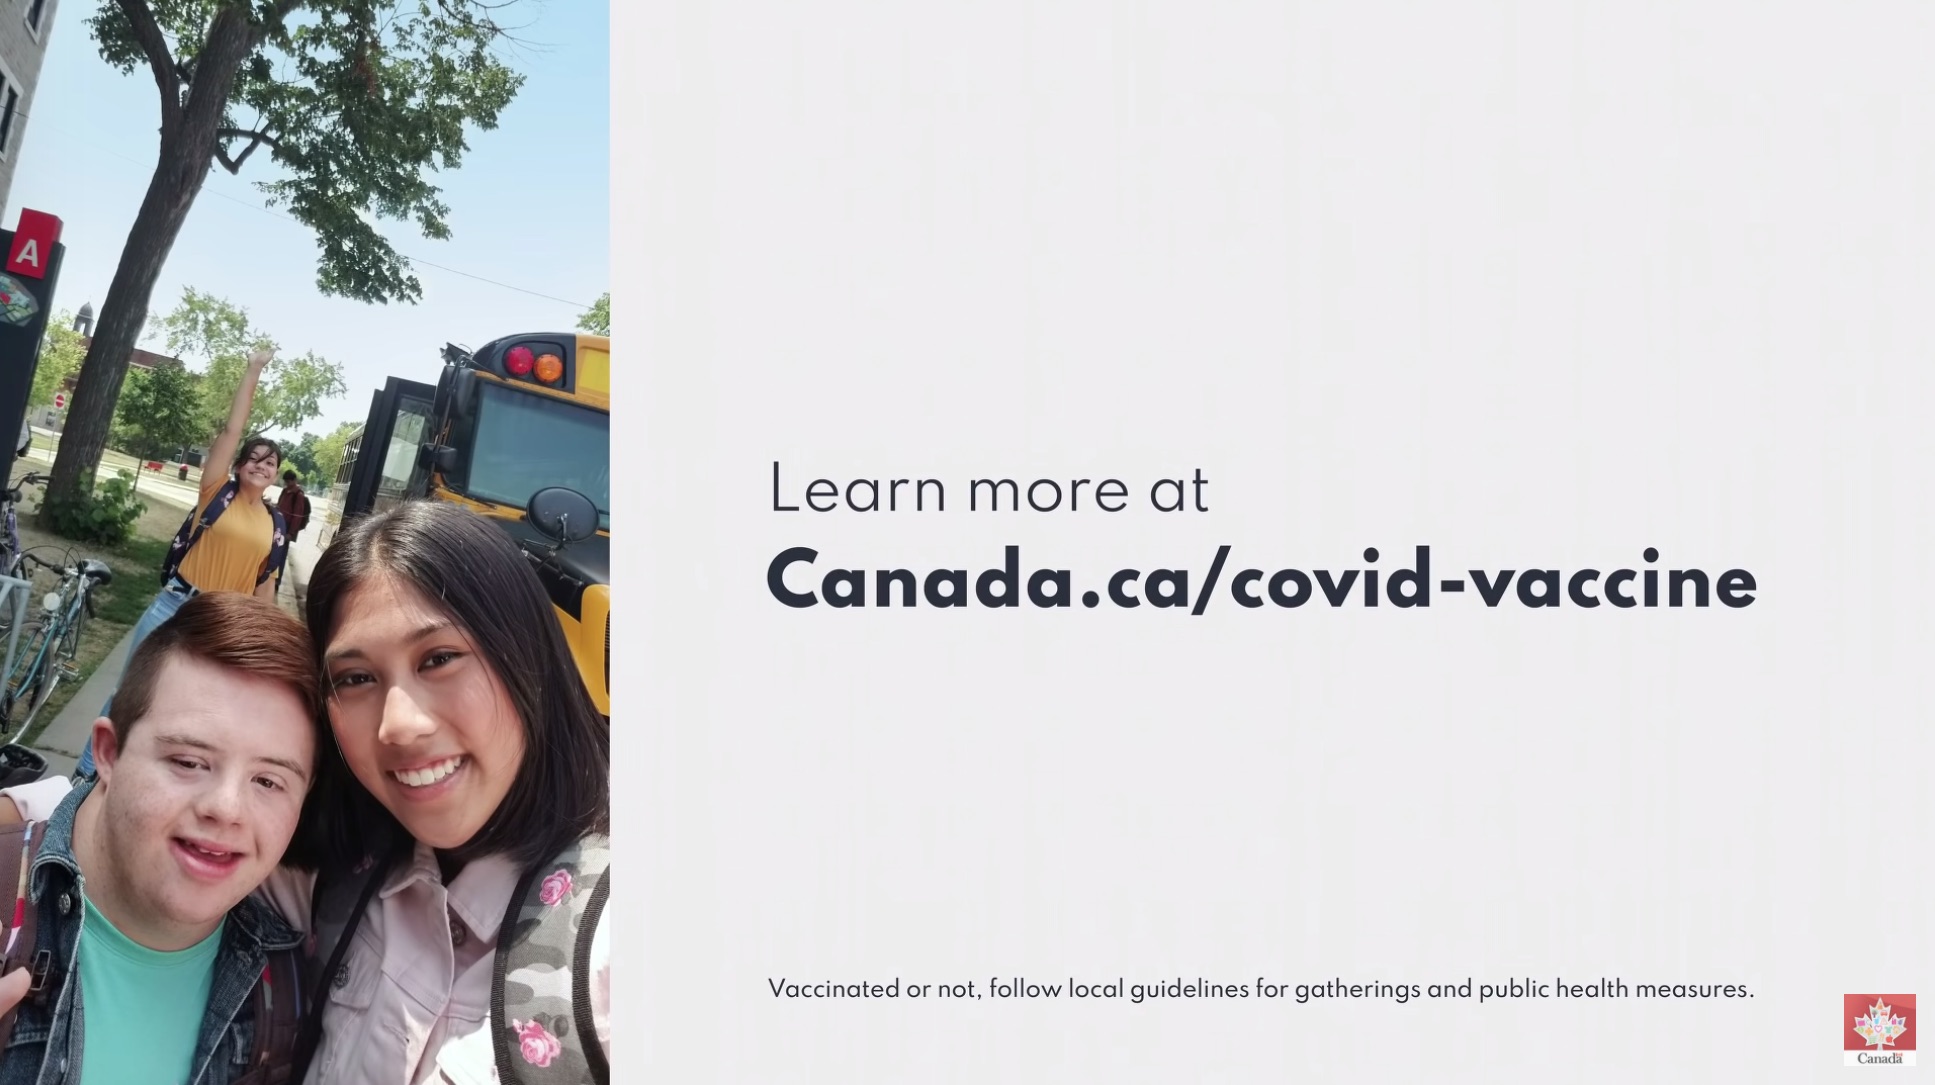 A screenshot from a Youtube and television advertisement published by the Public Health Agency of Canada. It shows a teacher and student taking a selfie next to a school bus on the left, and the text “Learn more at Canada.ca/covid-vaccine” on the right. In small text at the bottom it says, “Vaccinated or not, follow local guidelines for gatherings and public health measures.”.